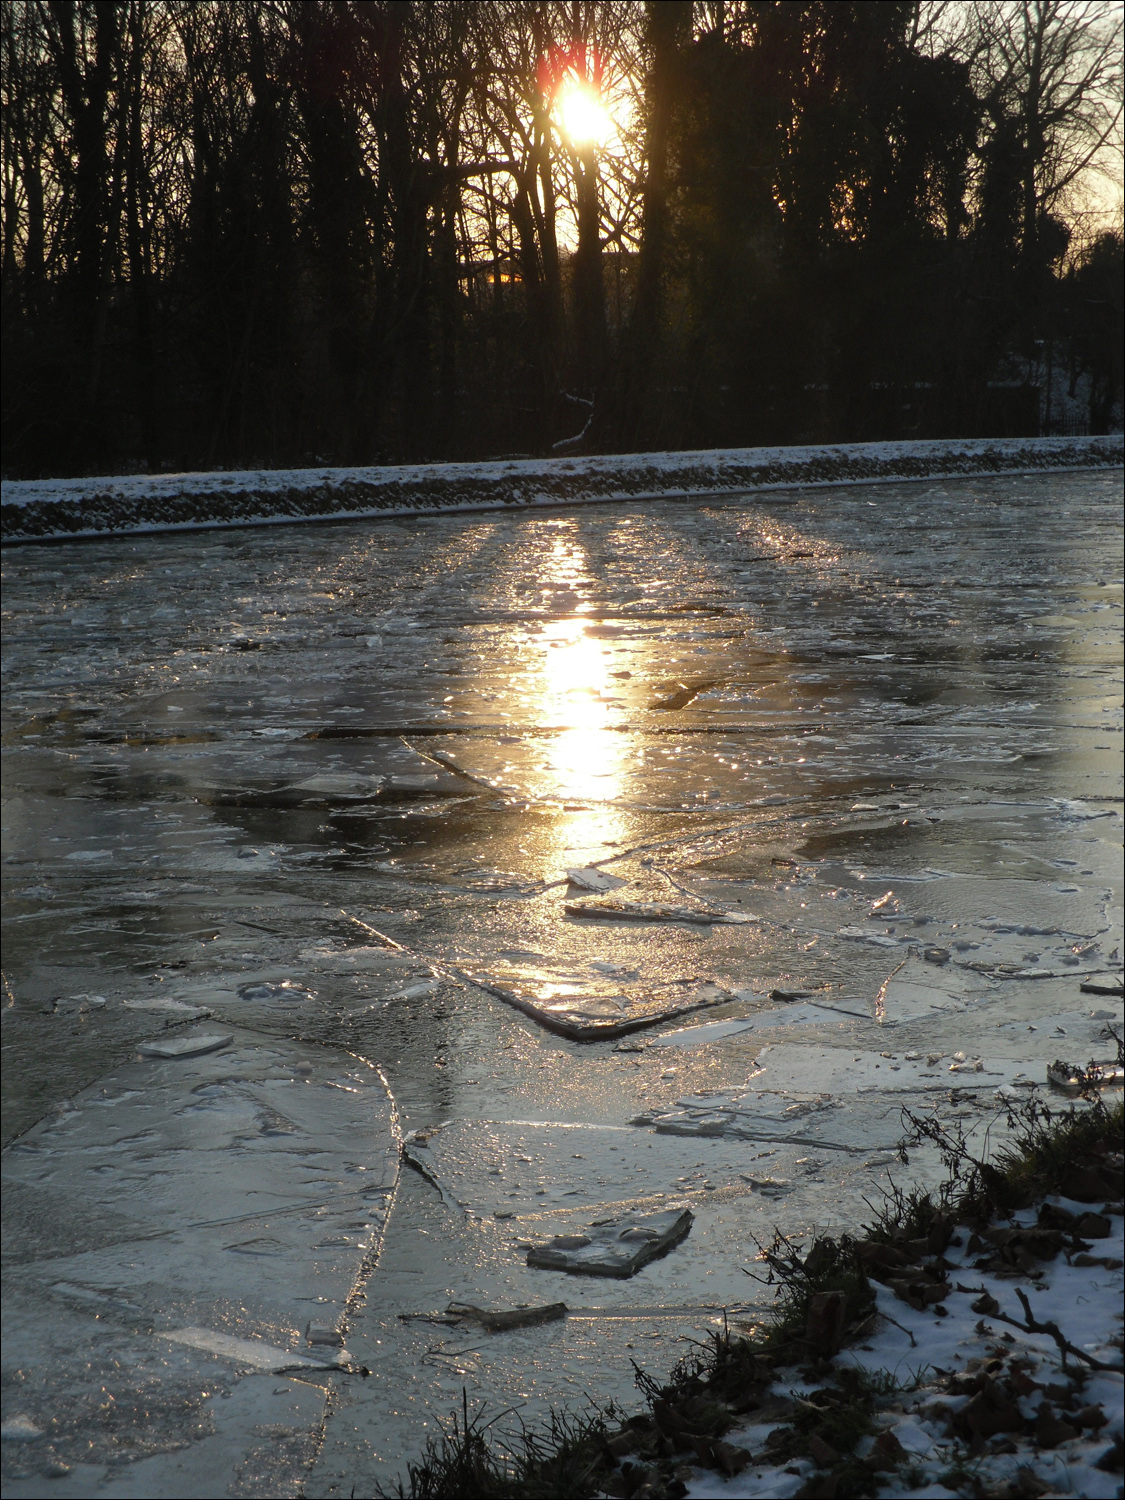 Frozen Delft canal - it was cold!